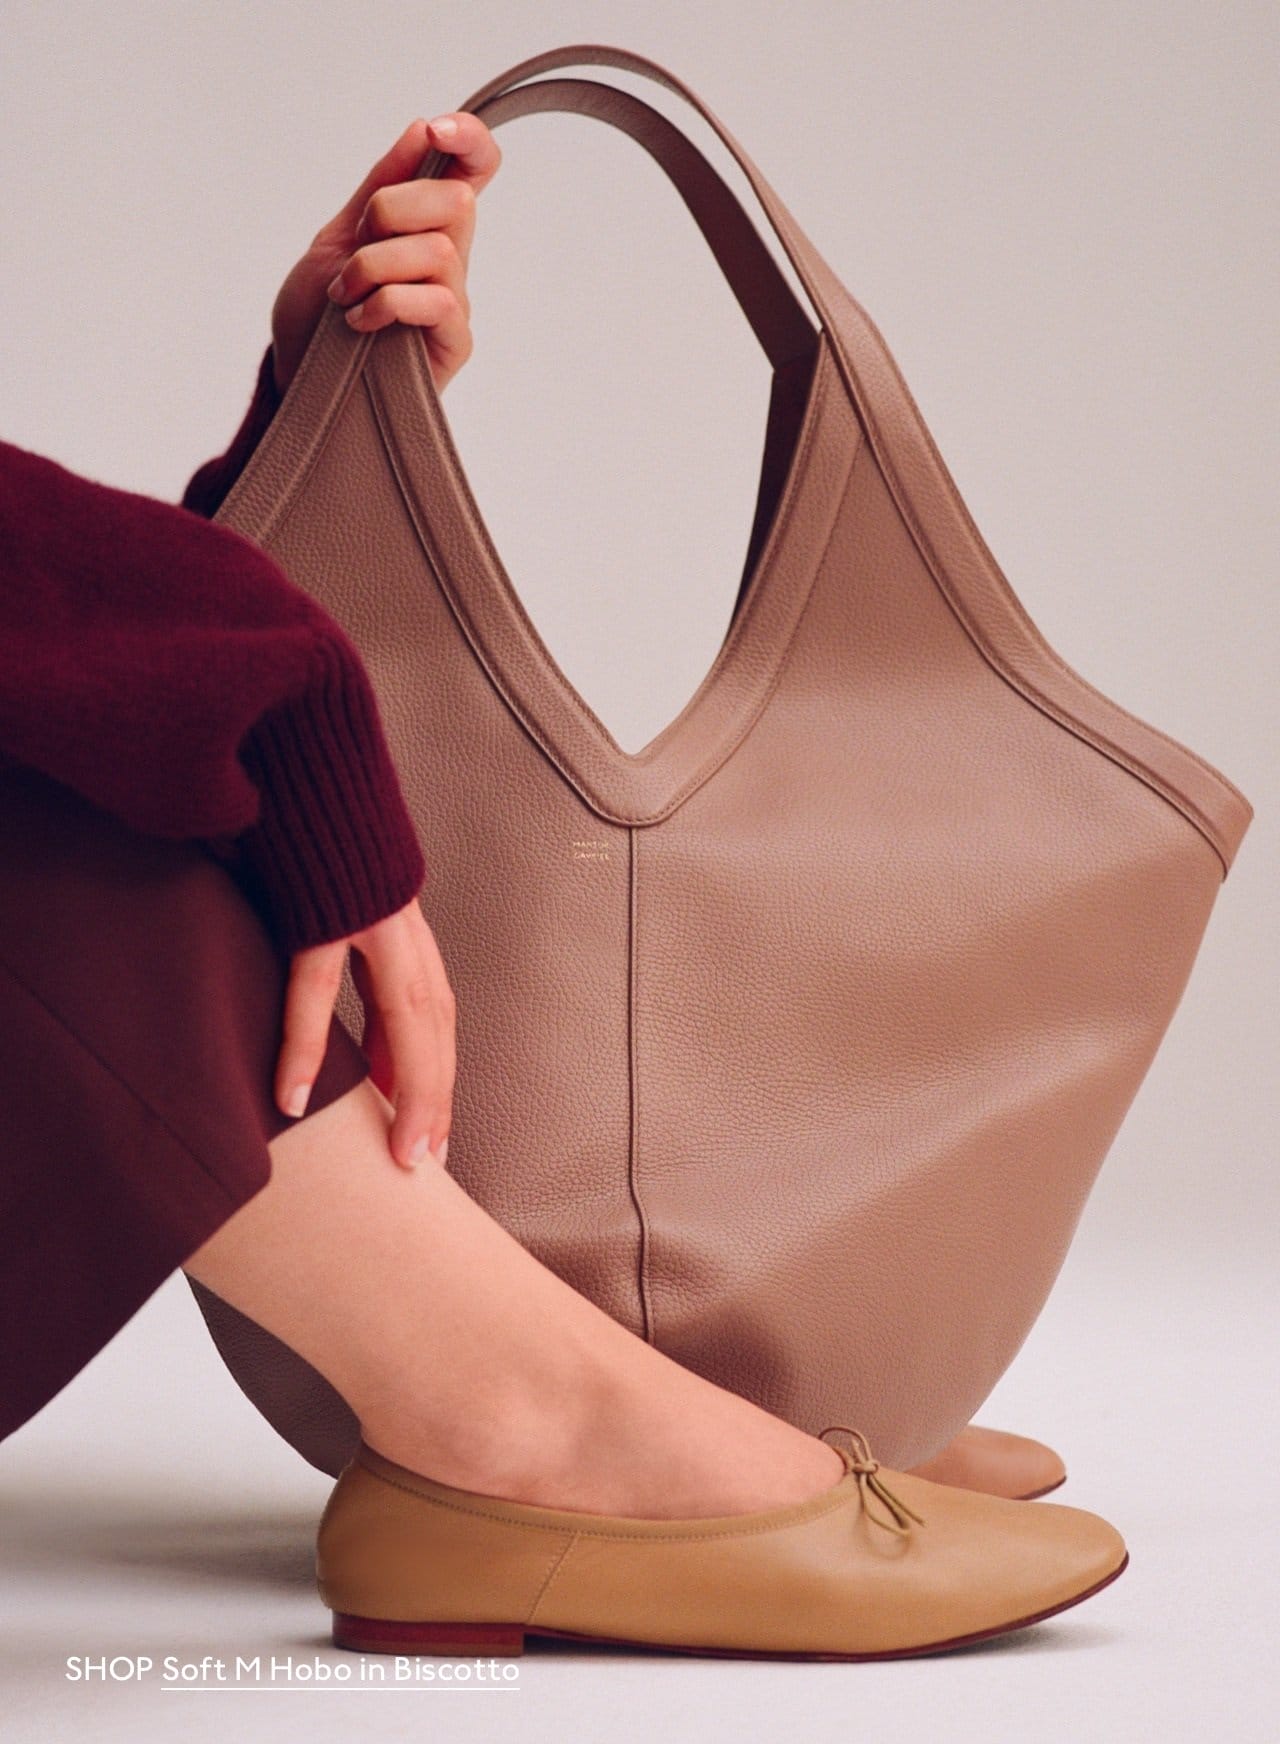 Shop the M Soft Hobo in Biscotto now.